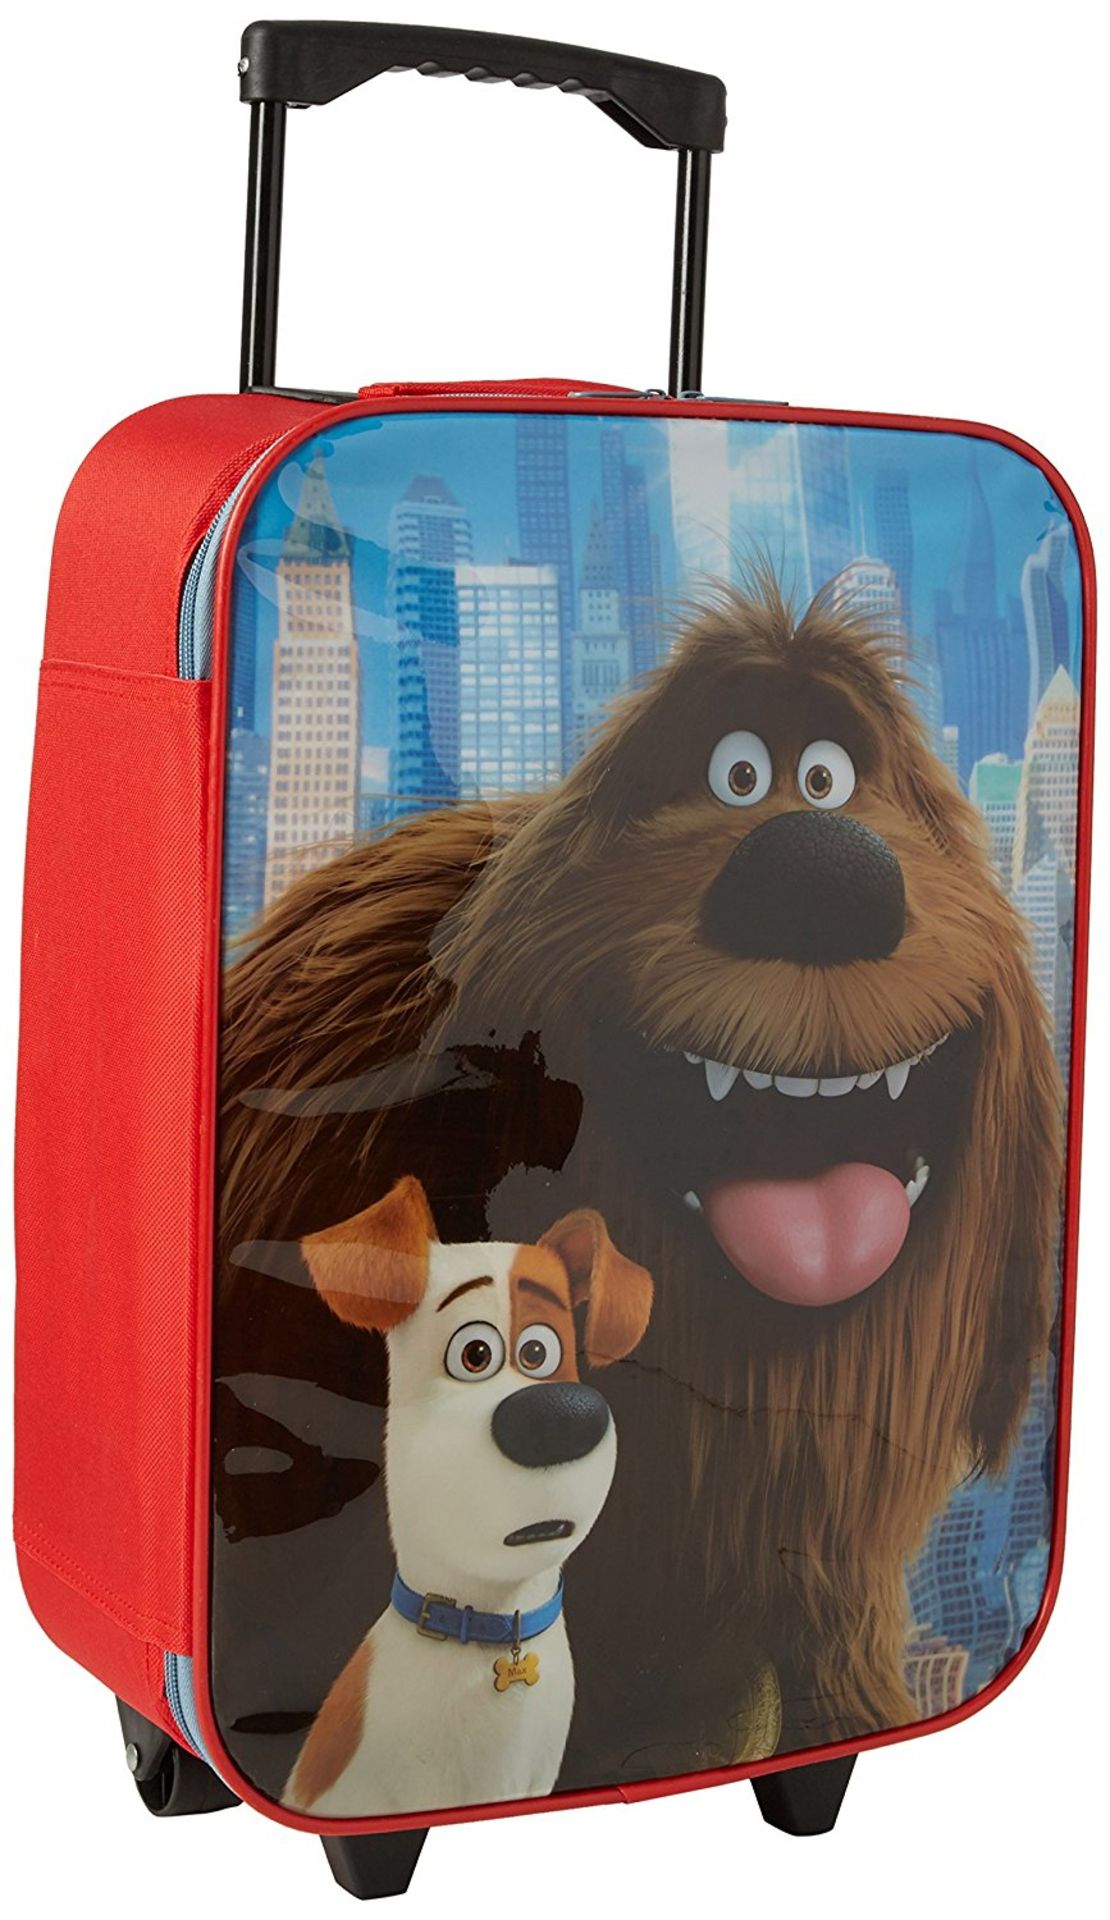 108 X Secret Life Of Pets 3Pce Travel Trolley Luggage Set [Brand New In Retail Packaging]